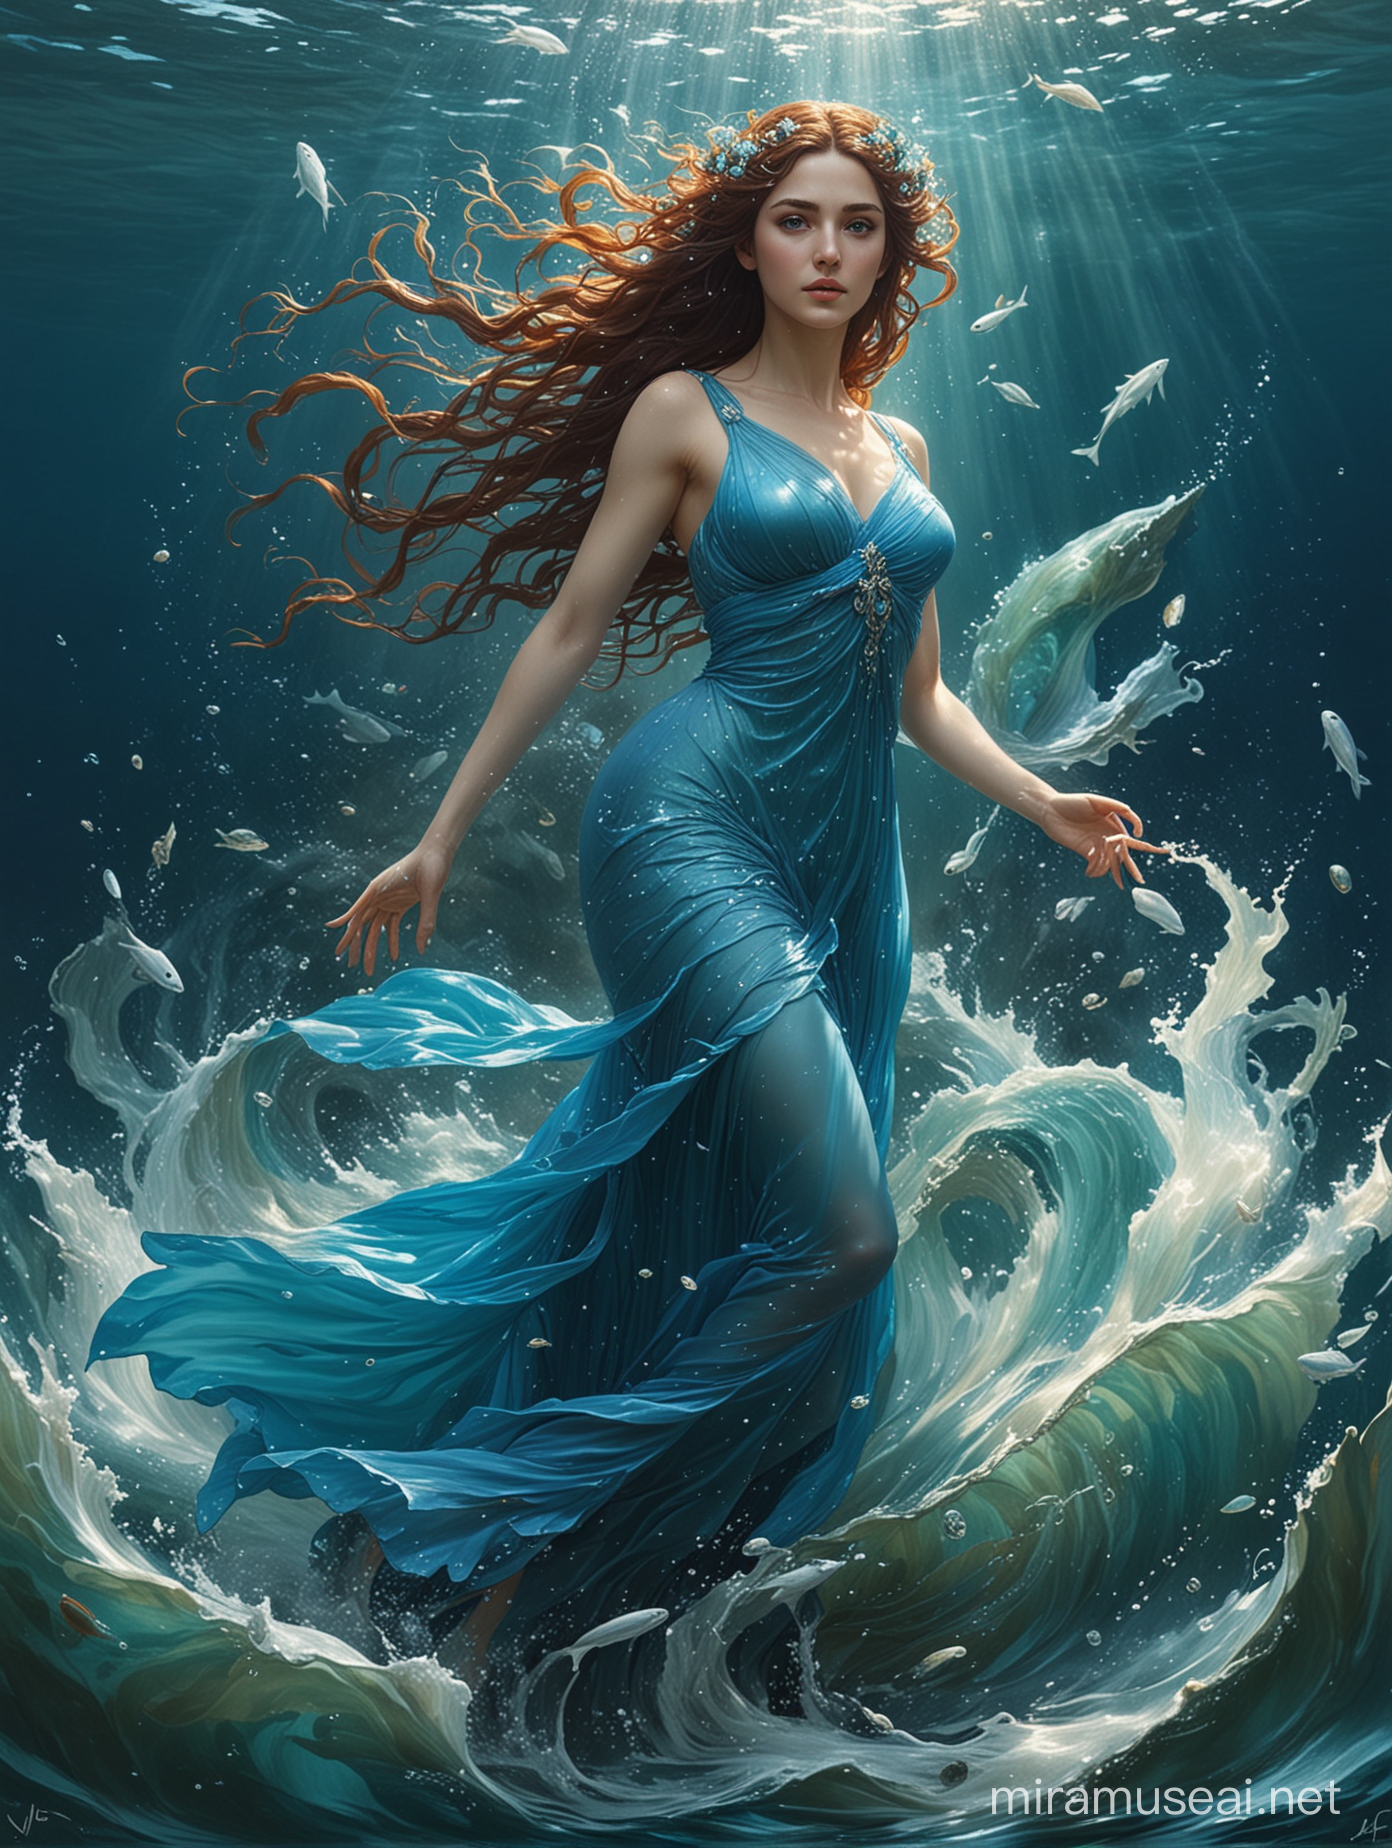 A masterpieced of Kimiya Hosseini as Leucothea, Greek goddess of the sea. She is under the sea, and her blue dress flows ethereally in the water until it mixes with the water until it disappears. She has has blue eyes.